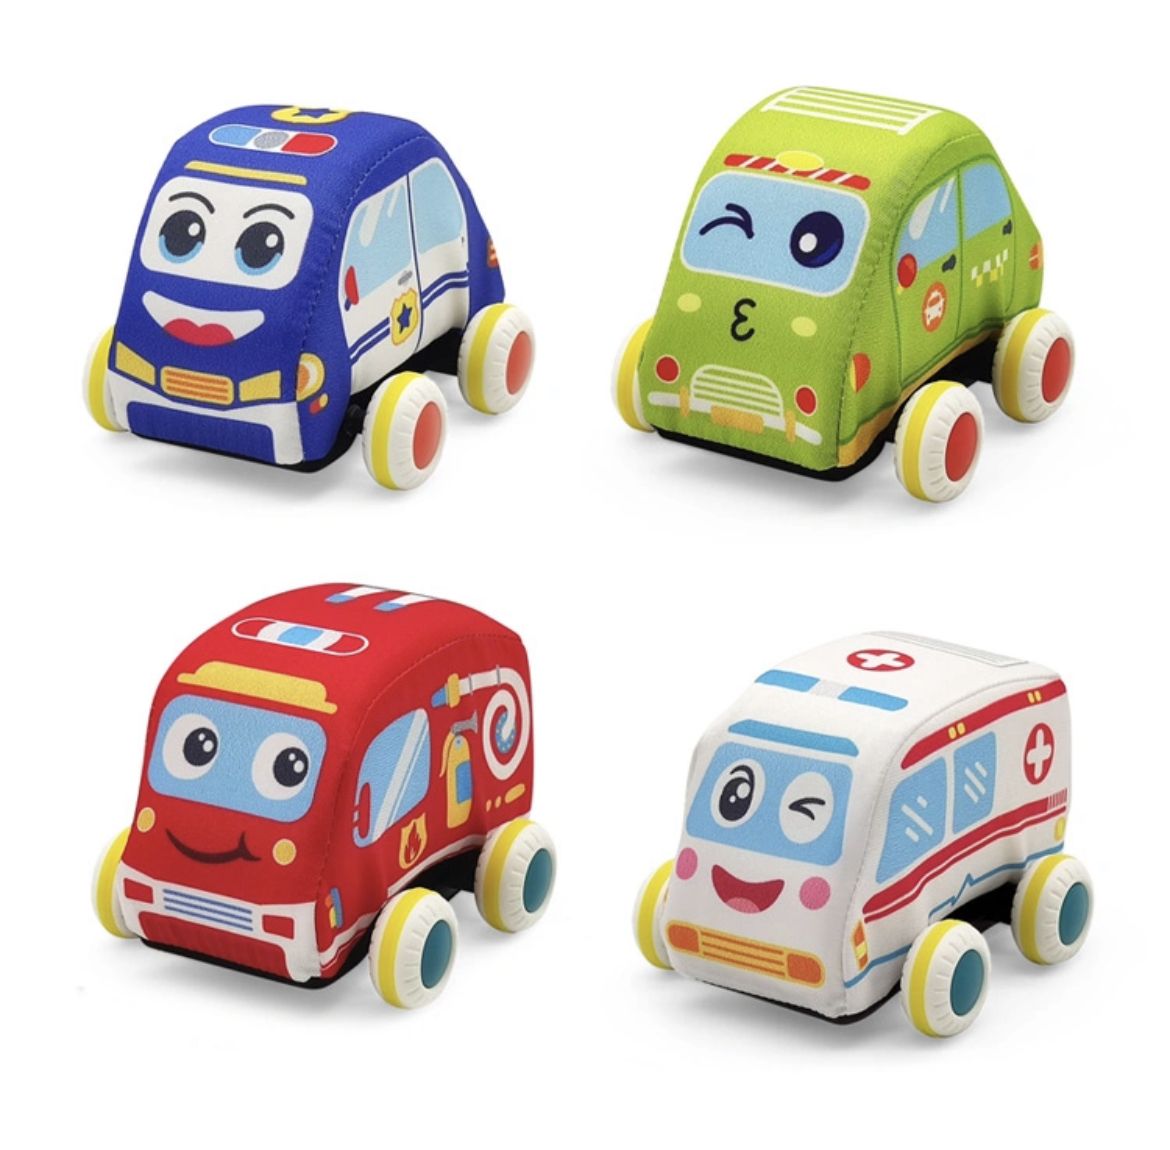 4 Educational Mini Plush Toy Car | Buy Online in South Africa ...